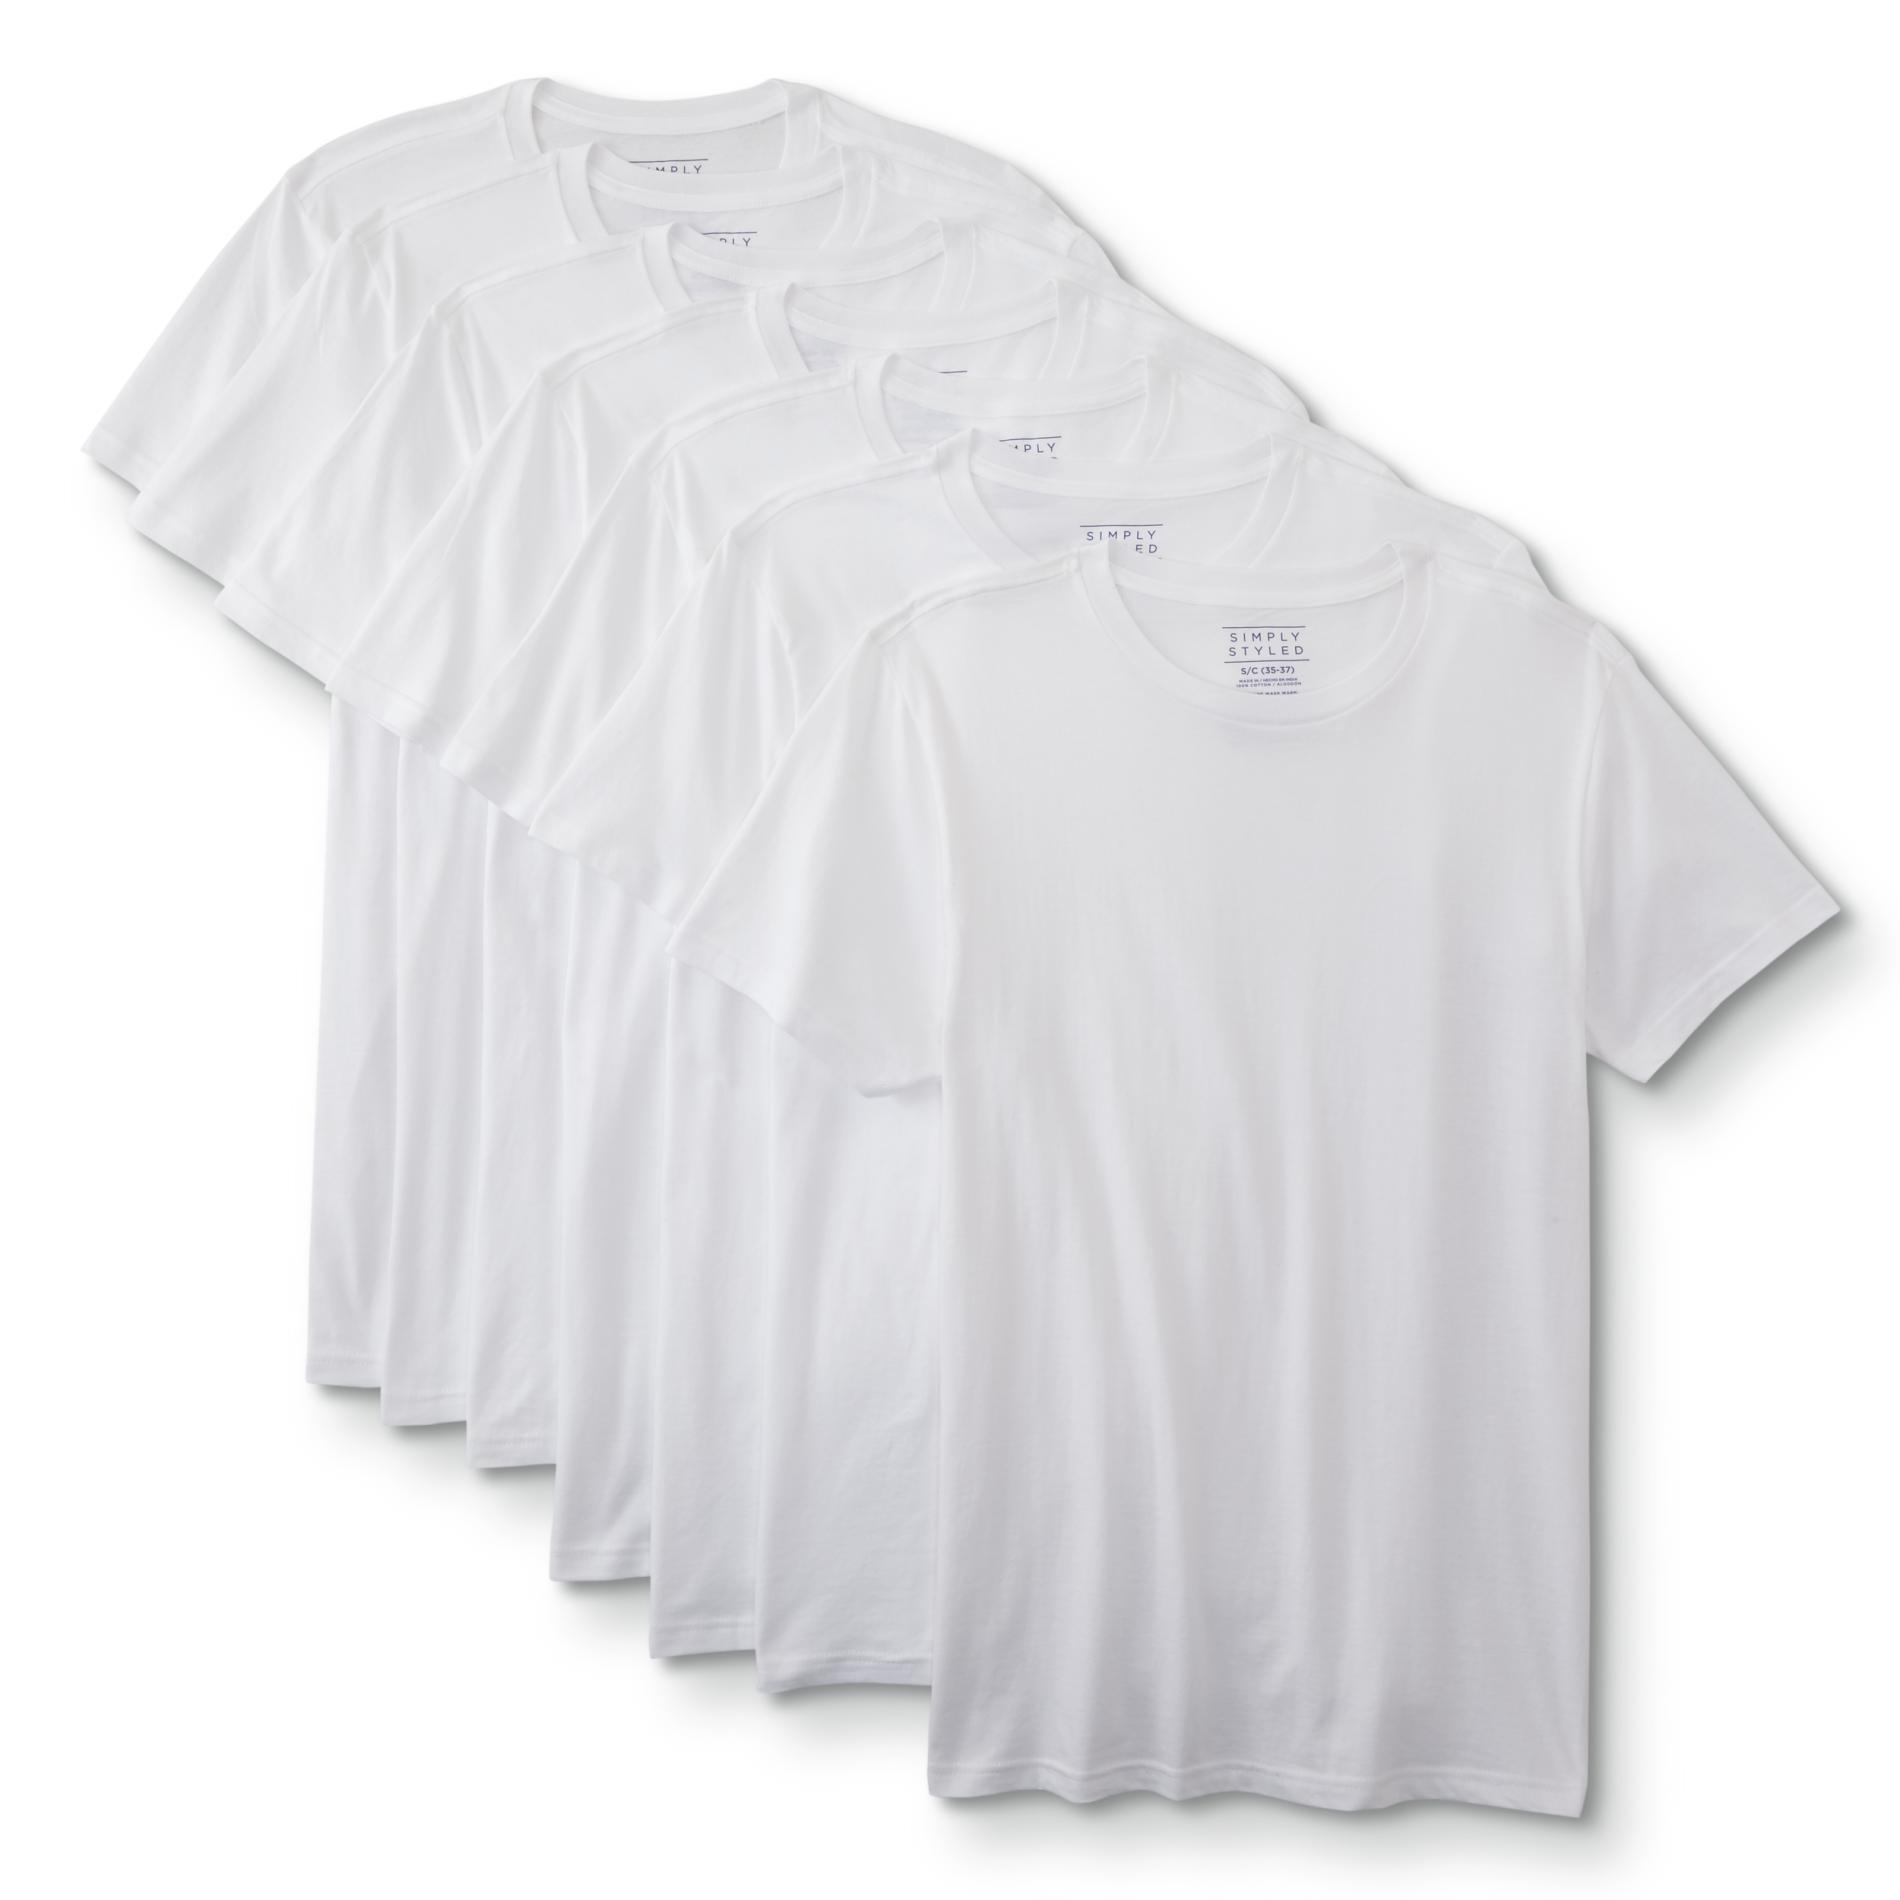 Simply Styled Men's 7-Pack Crew Neck T-Shirts